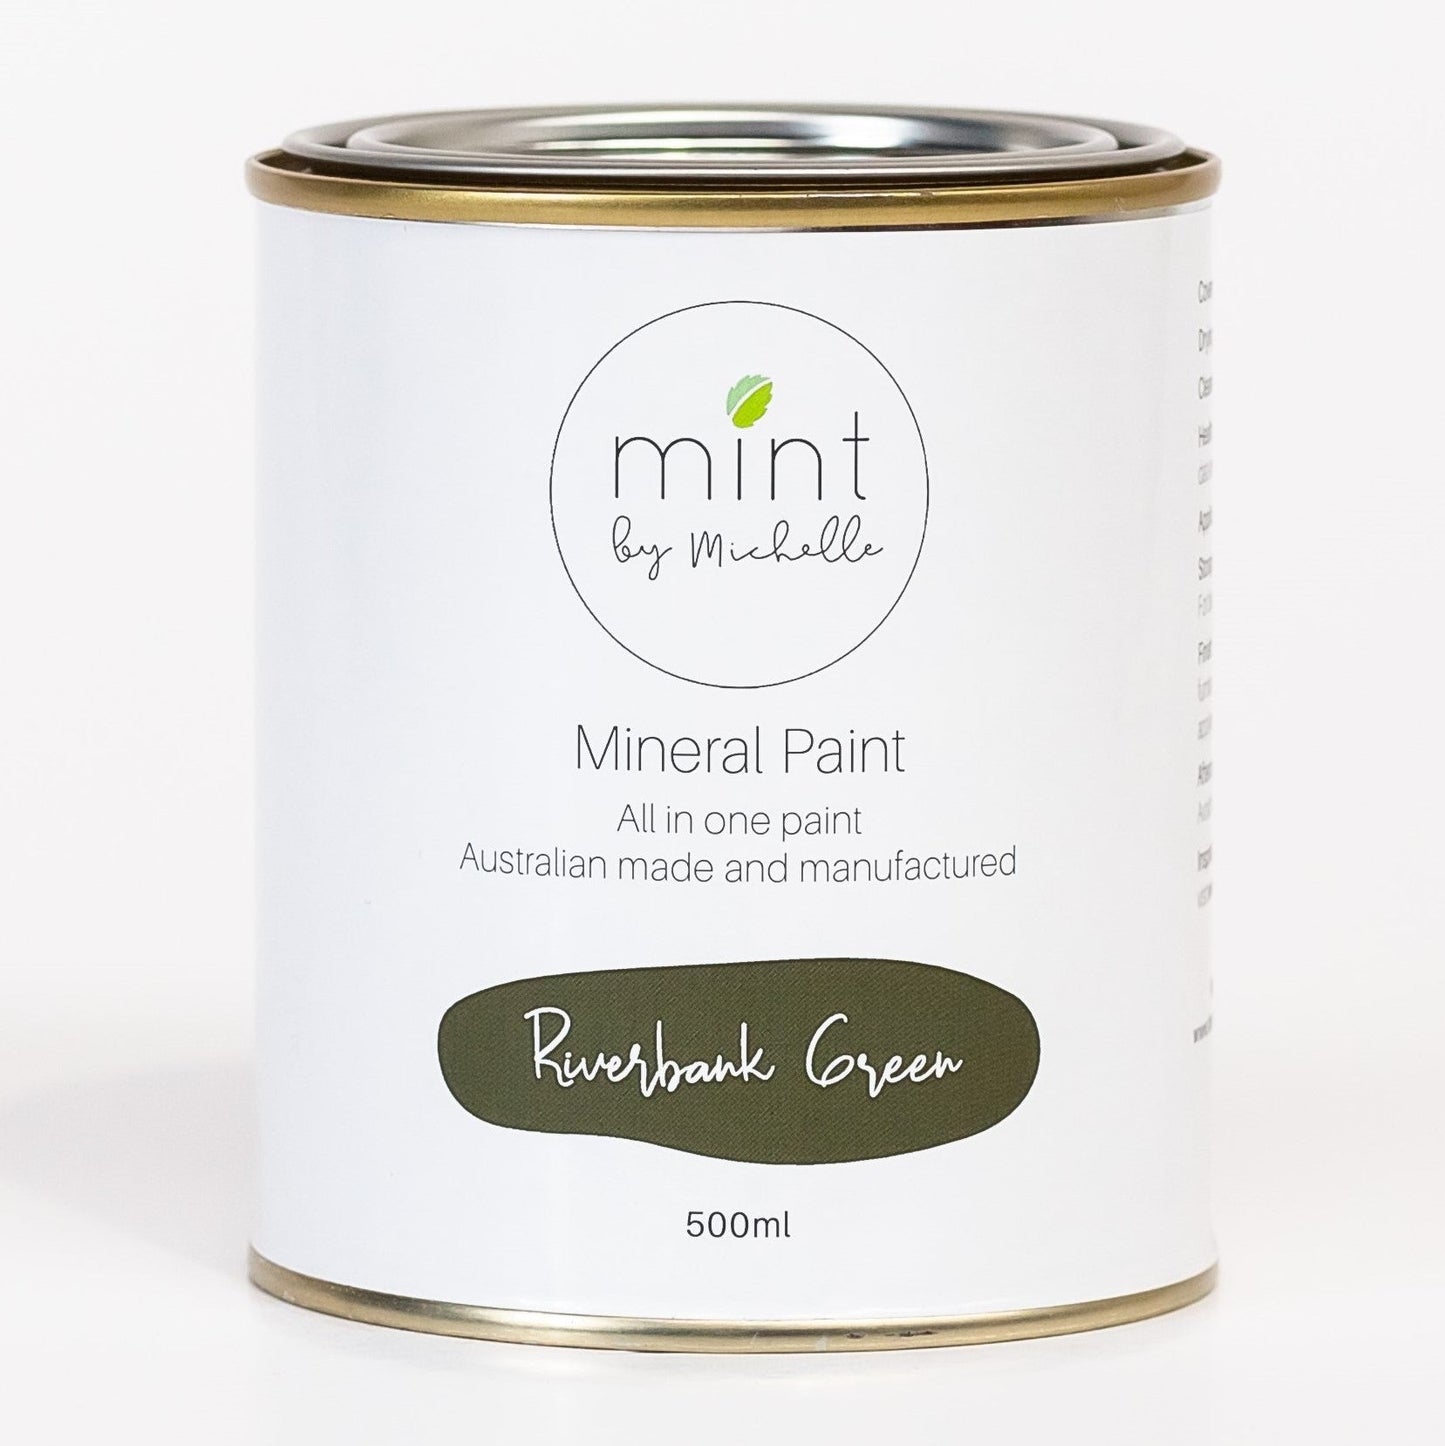 Riverbank Green Mineral Paint